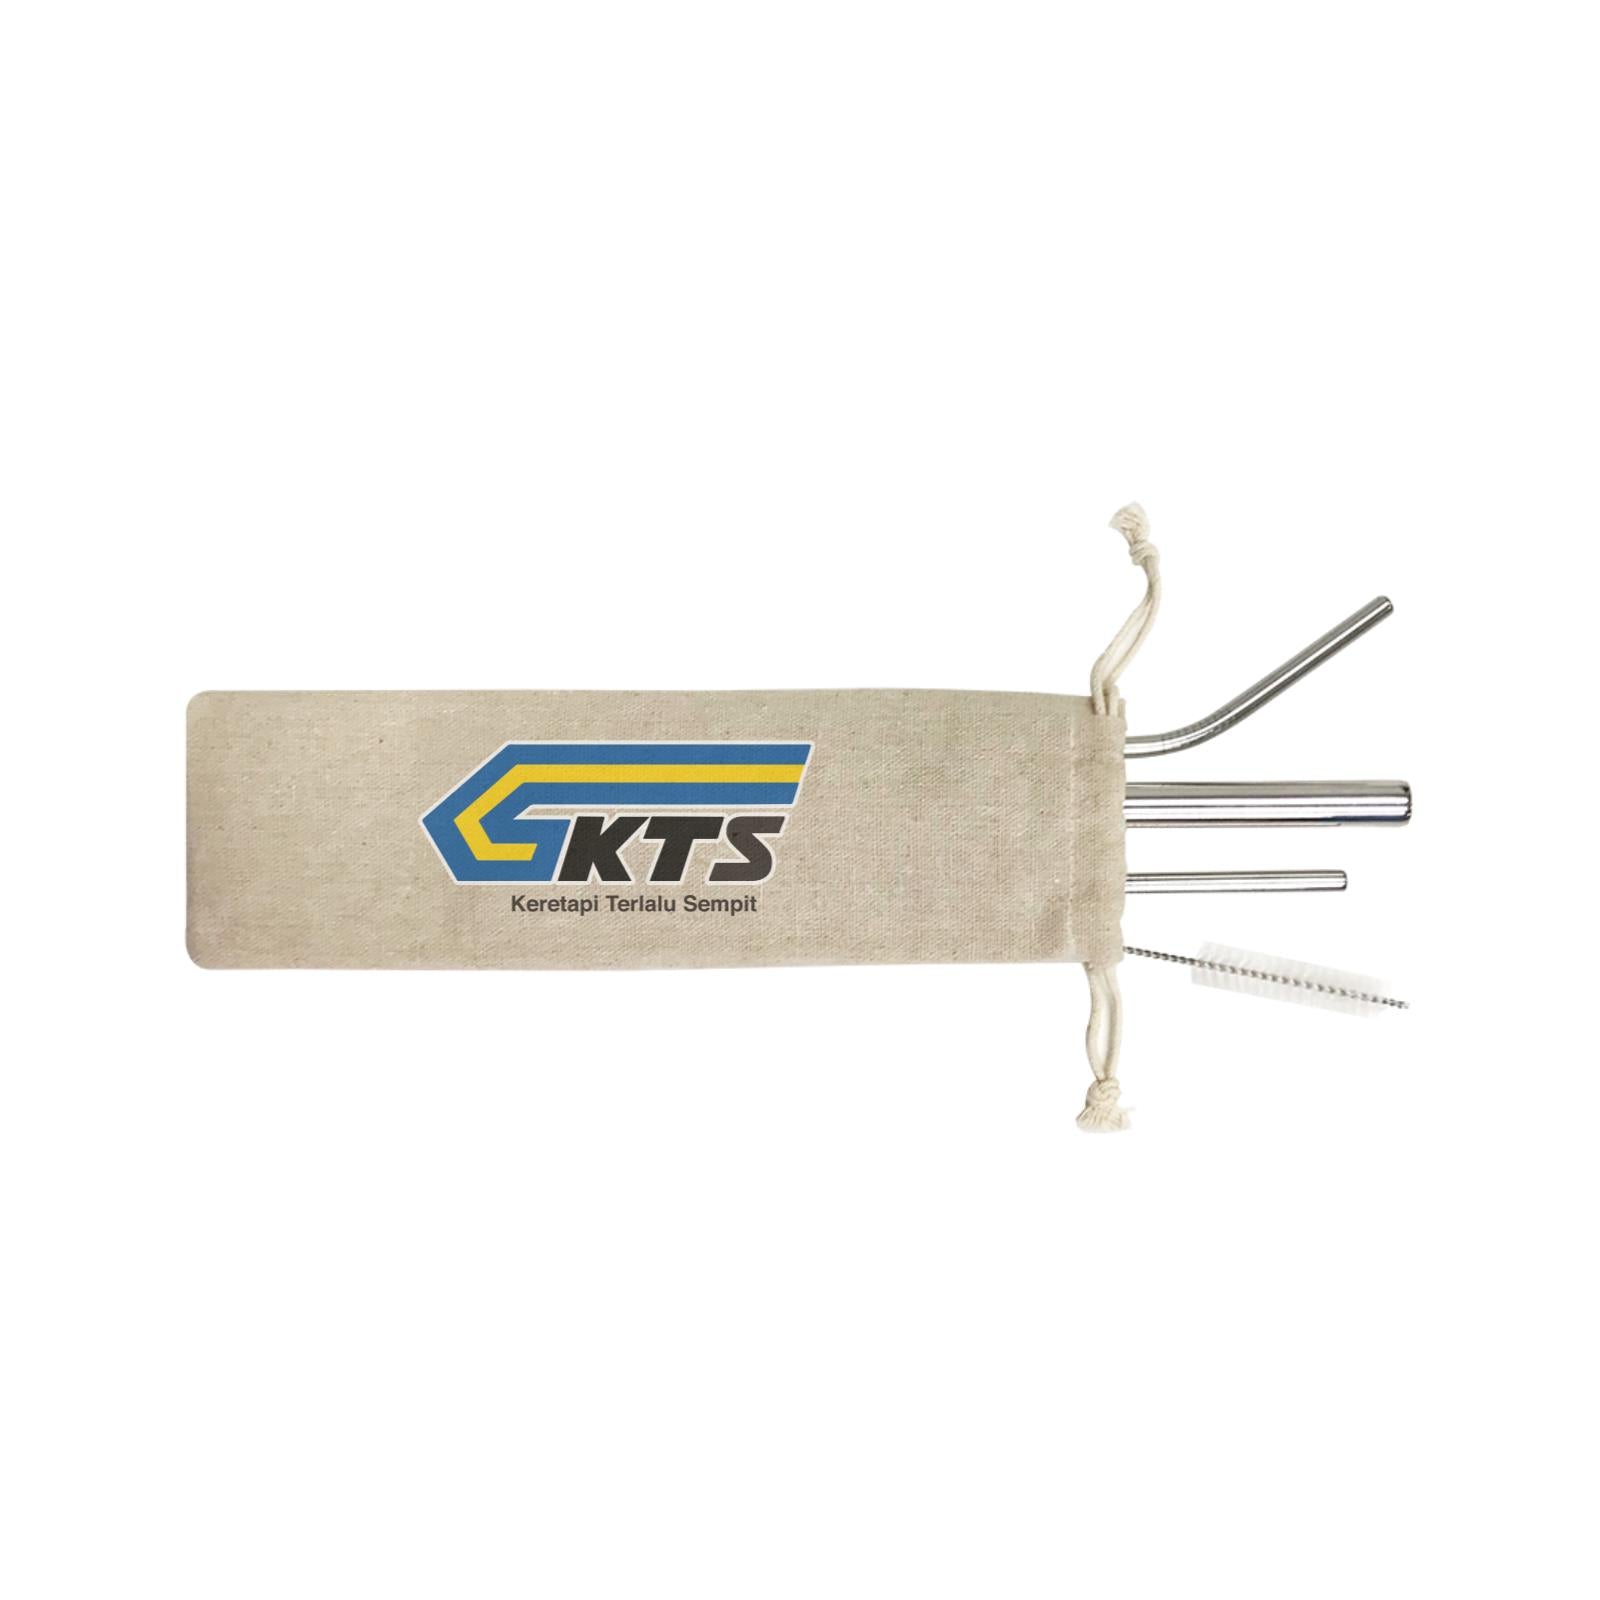 Slang Statement KTS 4-in-1 Stainless Steel Straw Set In a Satchel